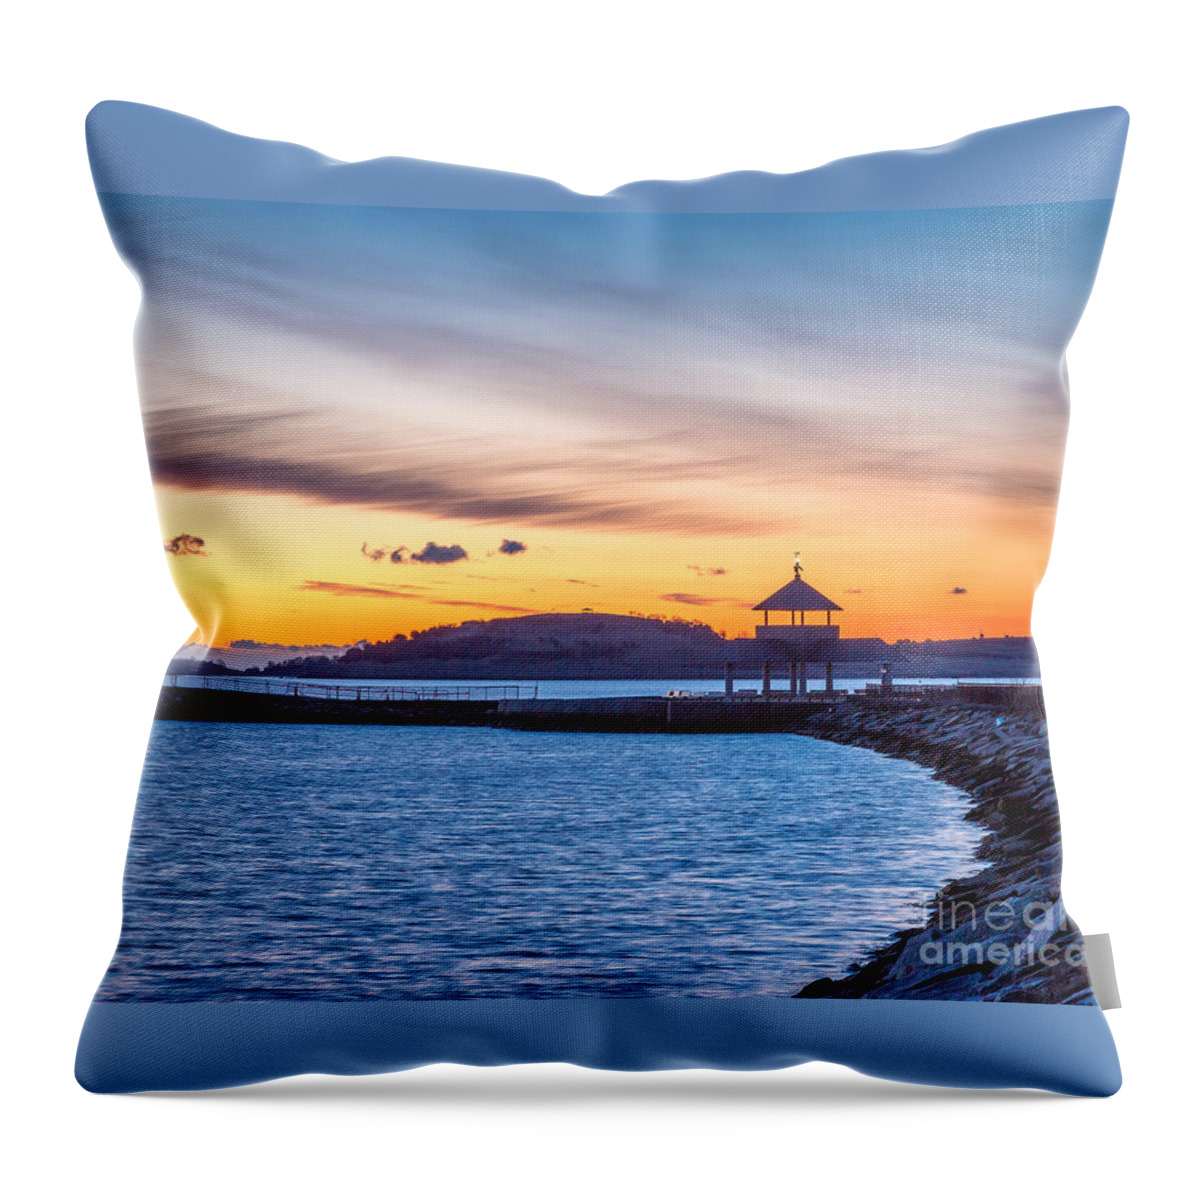 America Throw Pillow featuring the photograph Island View by Susan Cole Kelly